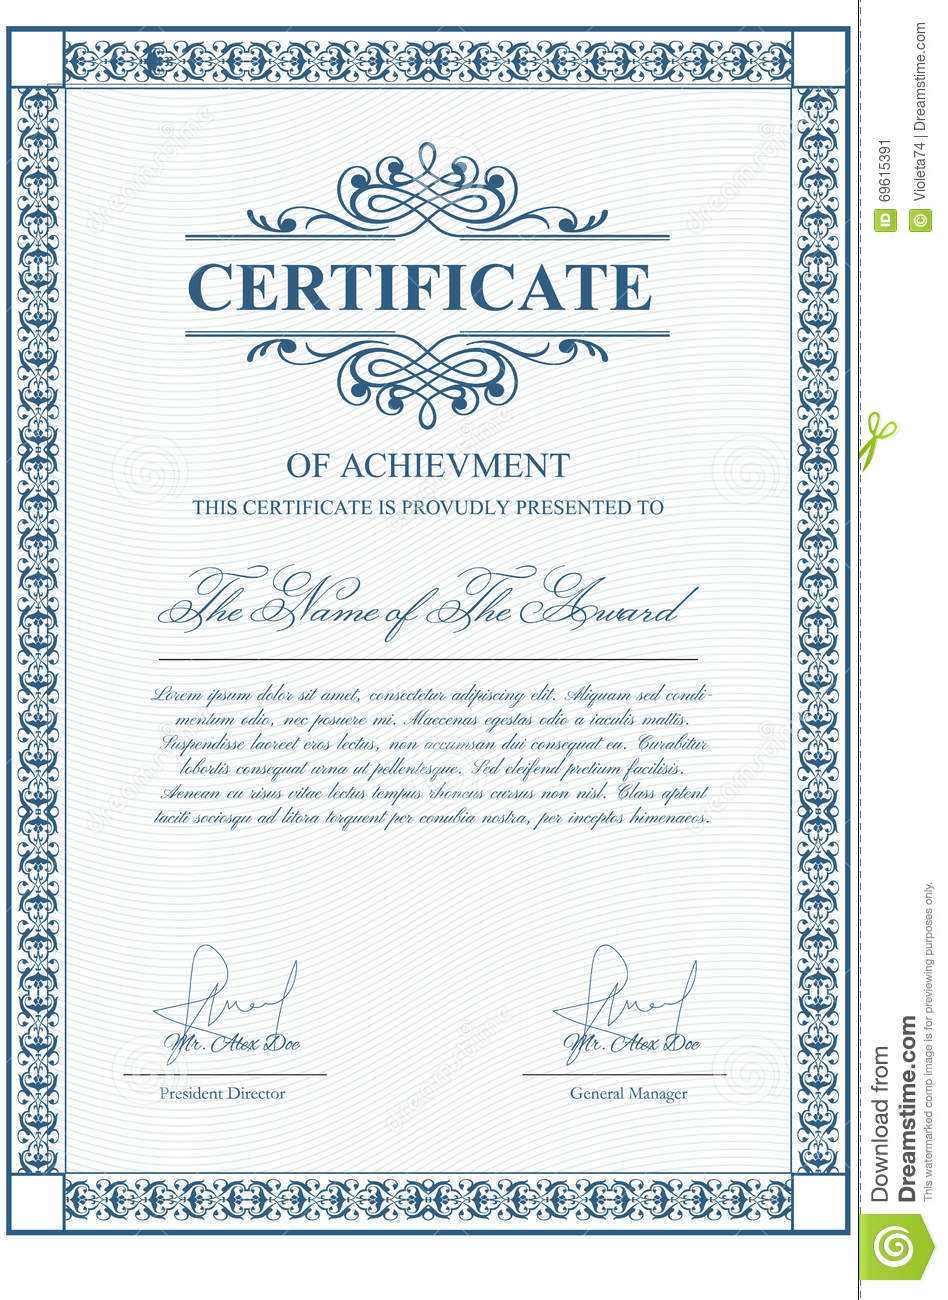 Certificate Template With Guilloche Elements. Stock Vector Regarding Validation Certificate Template